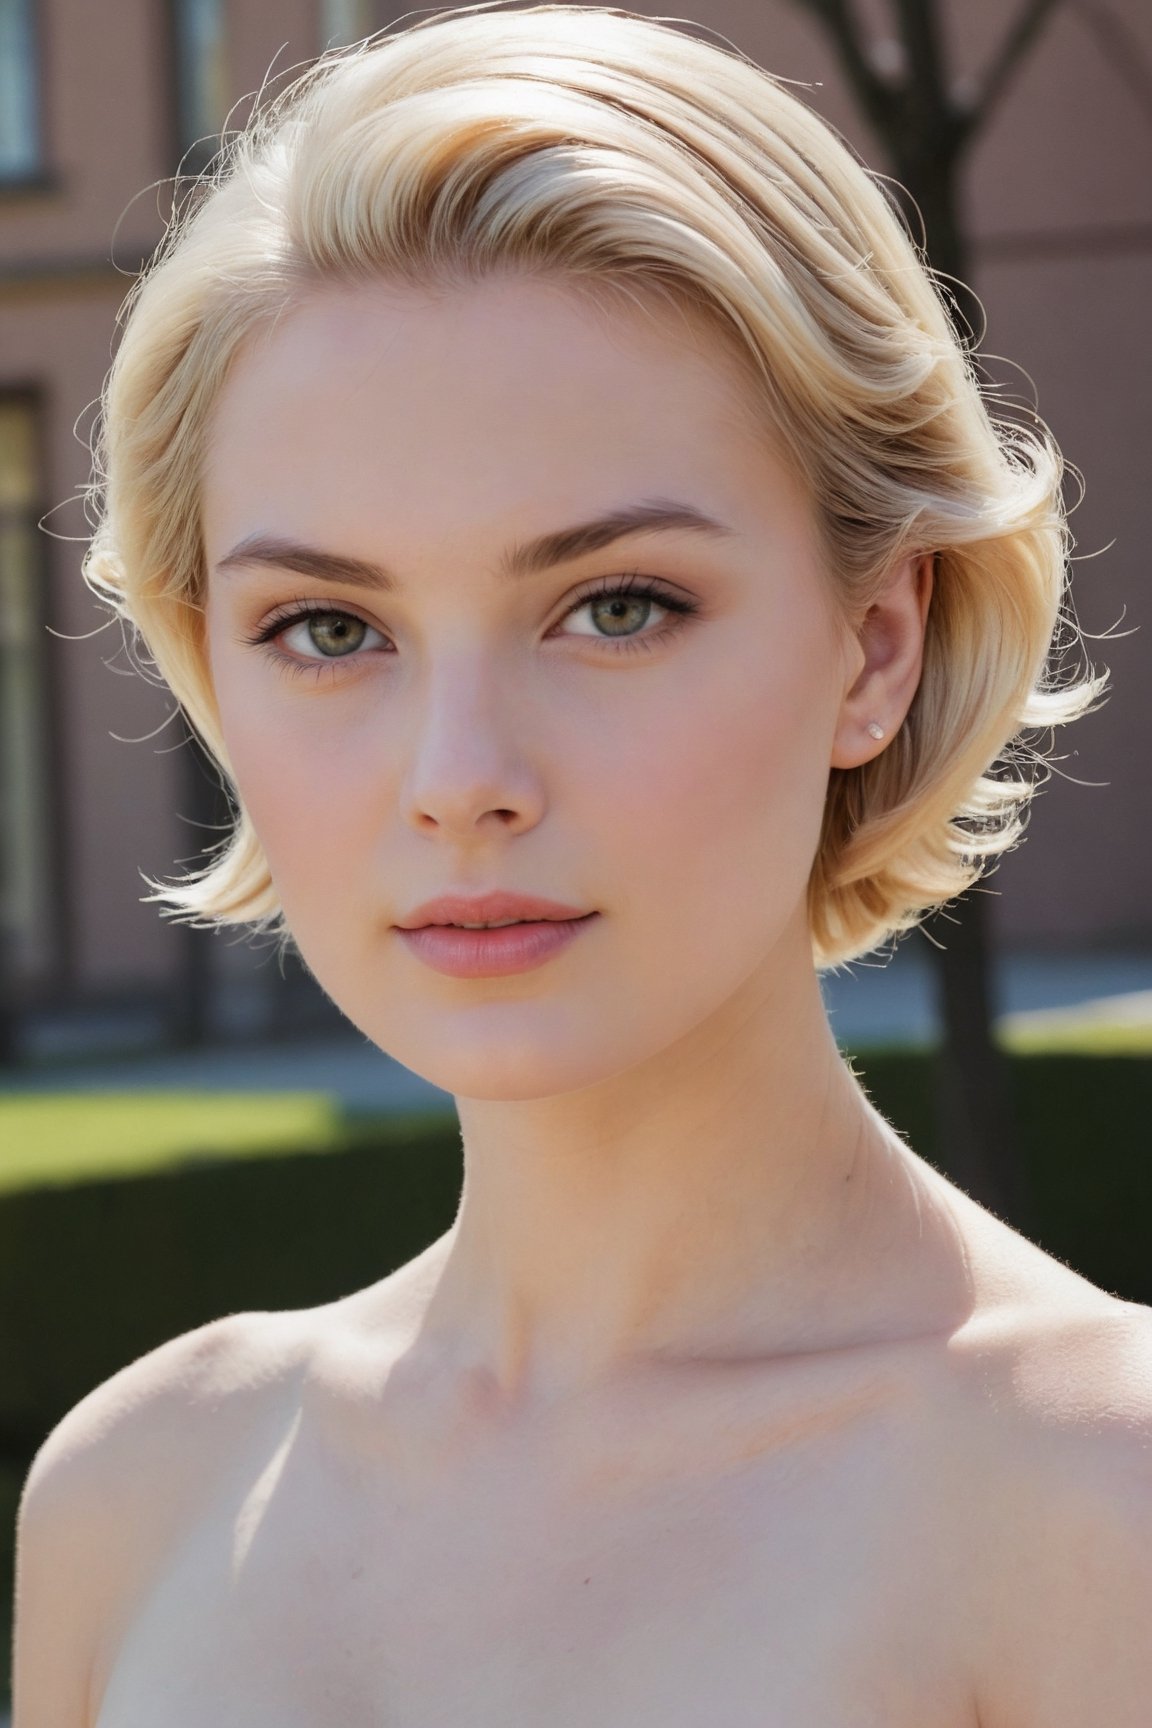 headshot,Nudity,Naked,Nude,No Clothes,Blonde hair,face similar to Grace Kelly,Russian,pale skin,Undercut Hairstyle,Natural makeup,21 year old,Boyish_normal_breasts,headshot,Sunny Day Spring,Posing for a photo



